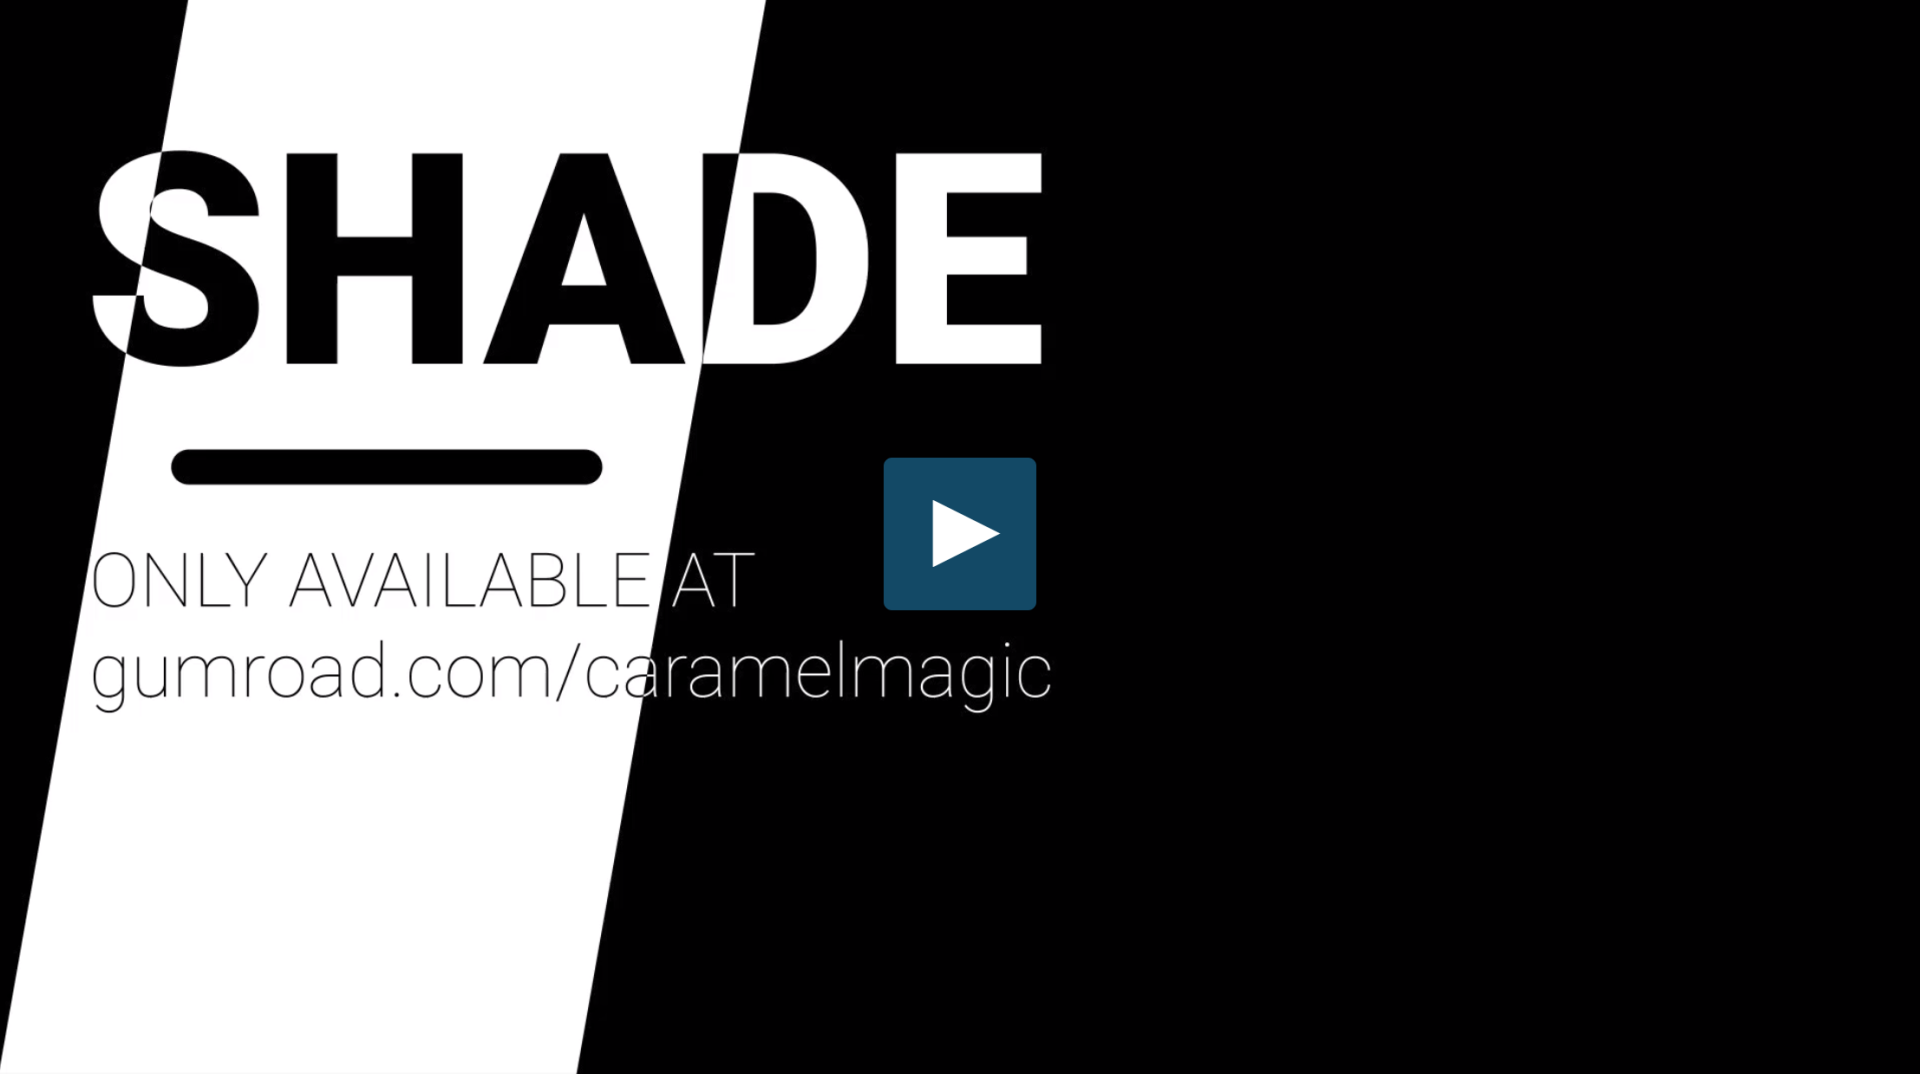 Shade by Eric Caraballo (MP4 Video Download 1080p FullHD Quality)